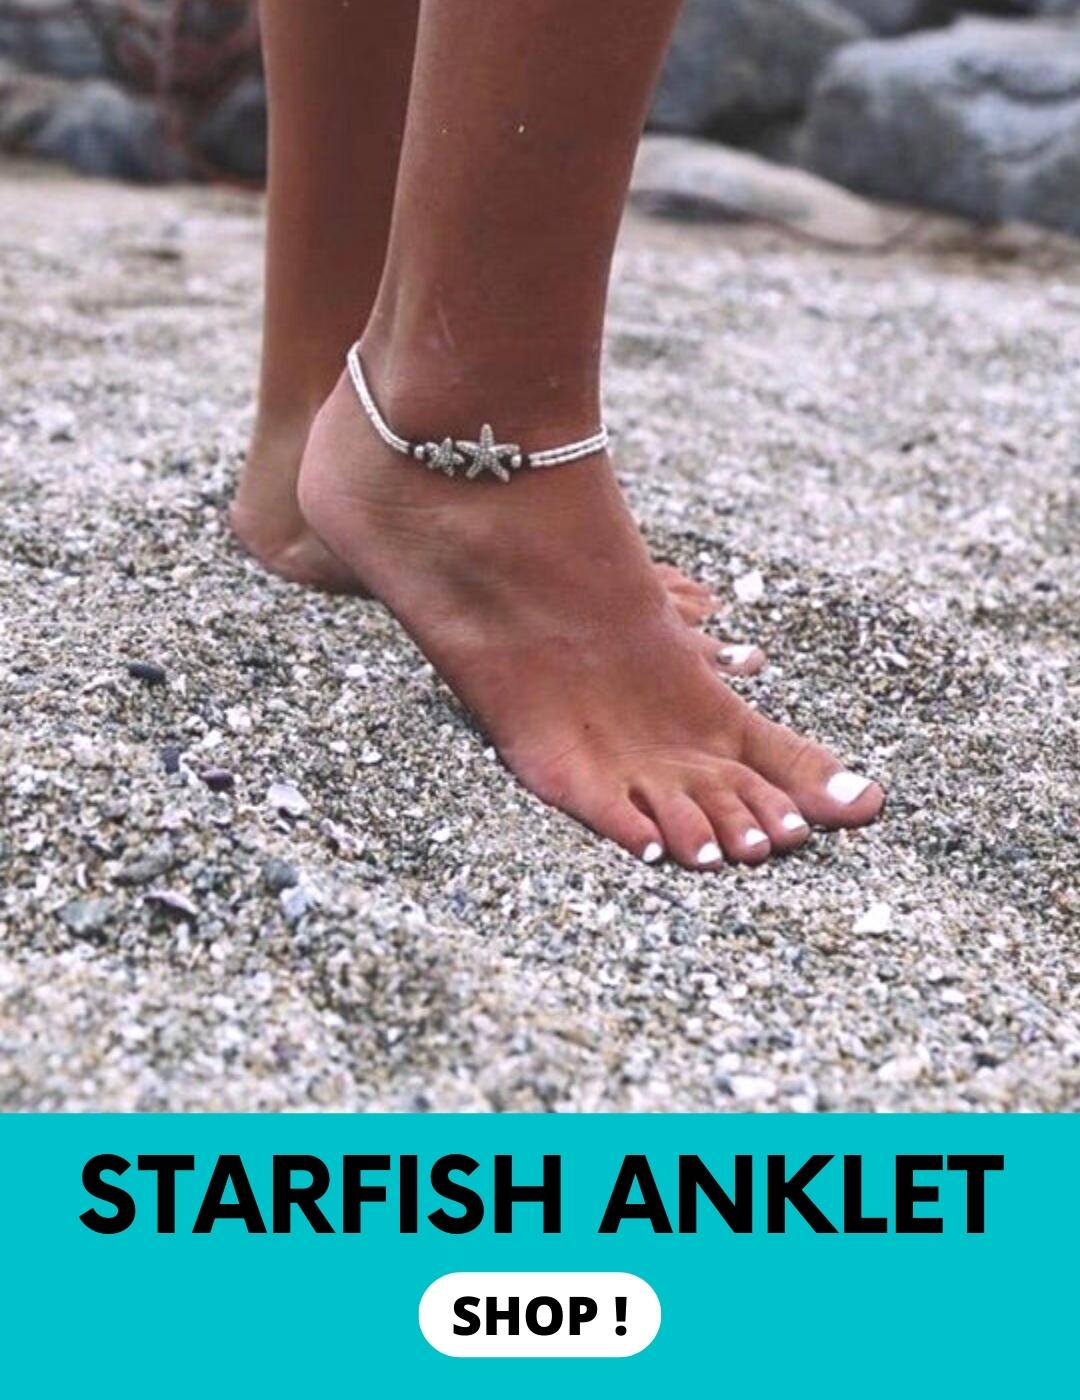 Interesting meaning and symbolism of starfish anklet